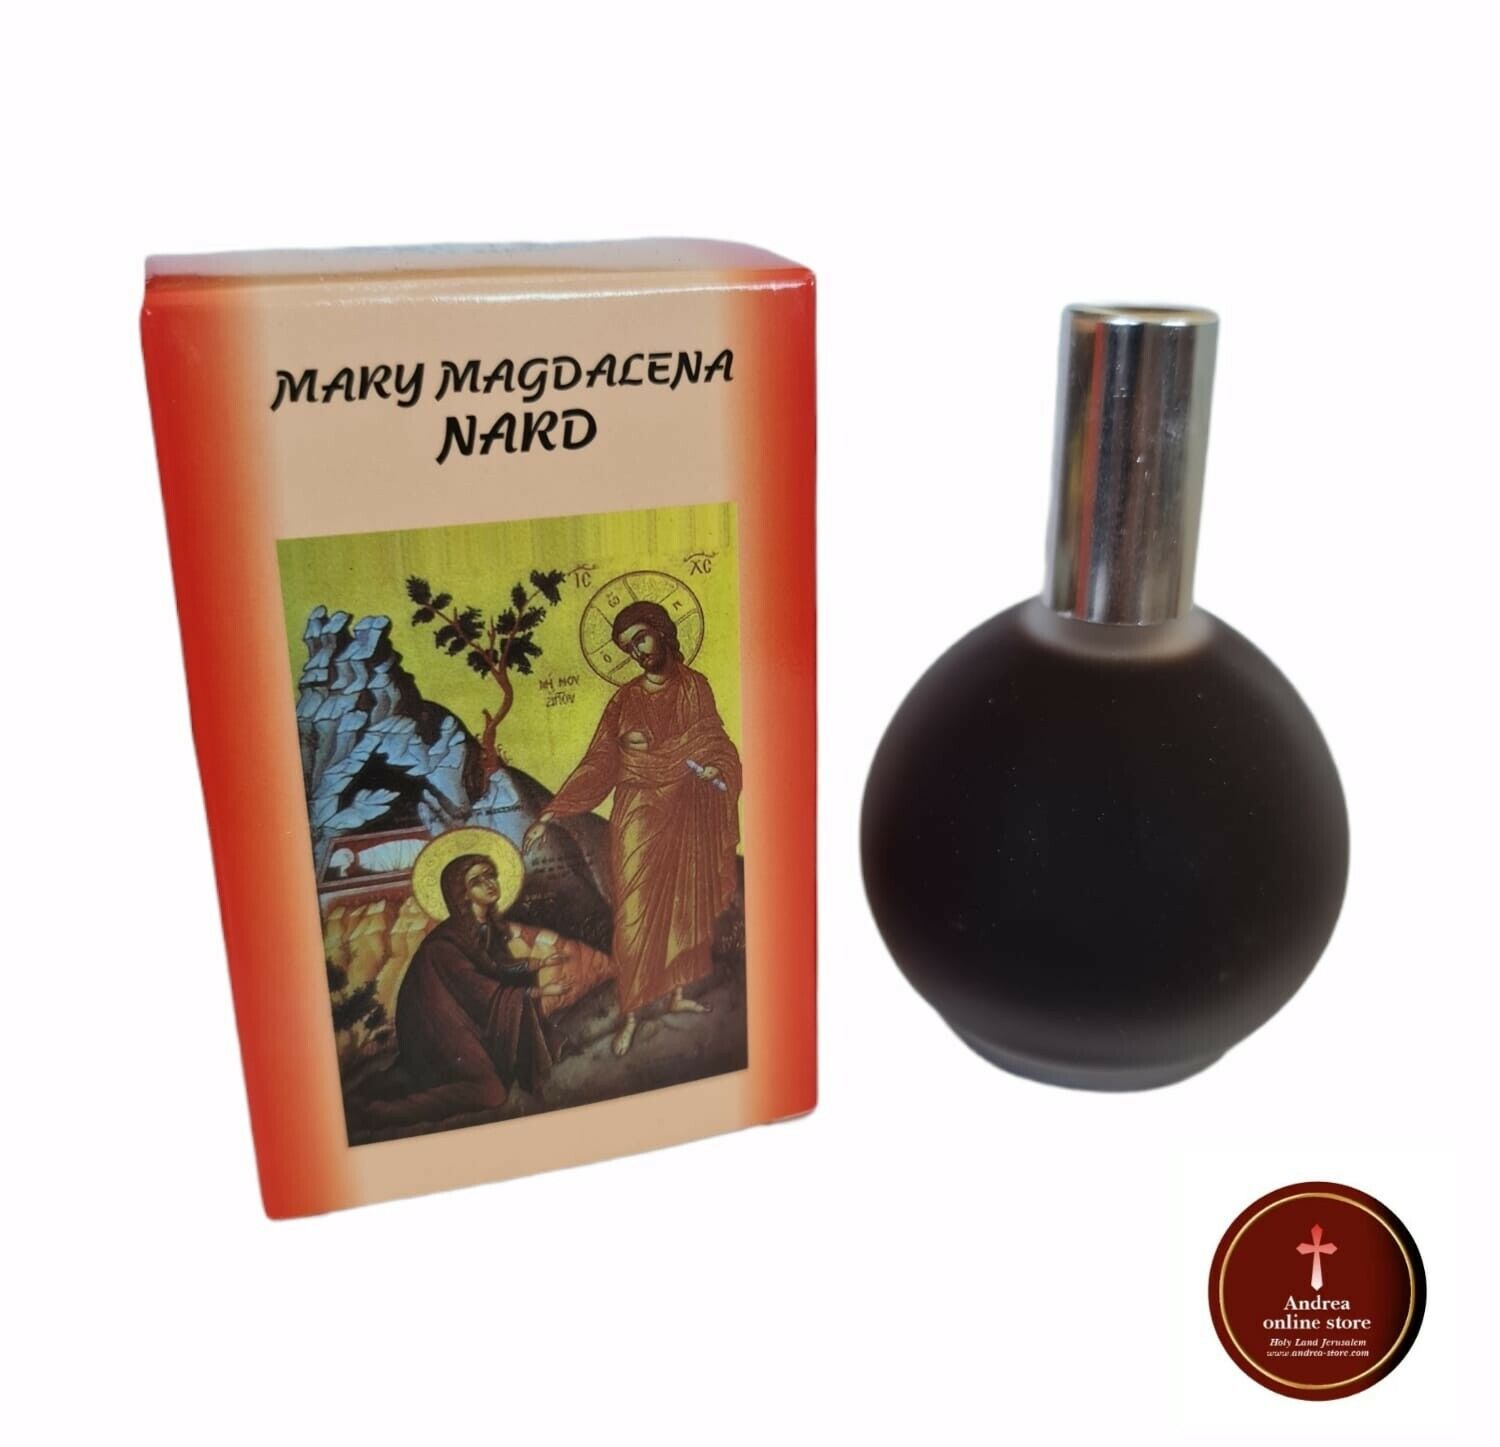 Mary Magdalena nard perfume spray 100 ml bottle top quality made in jerusalem